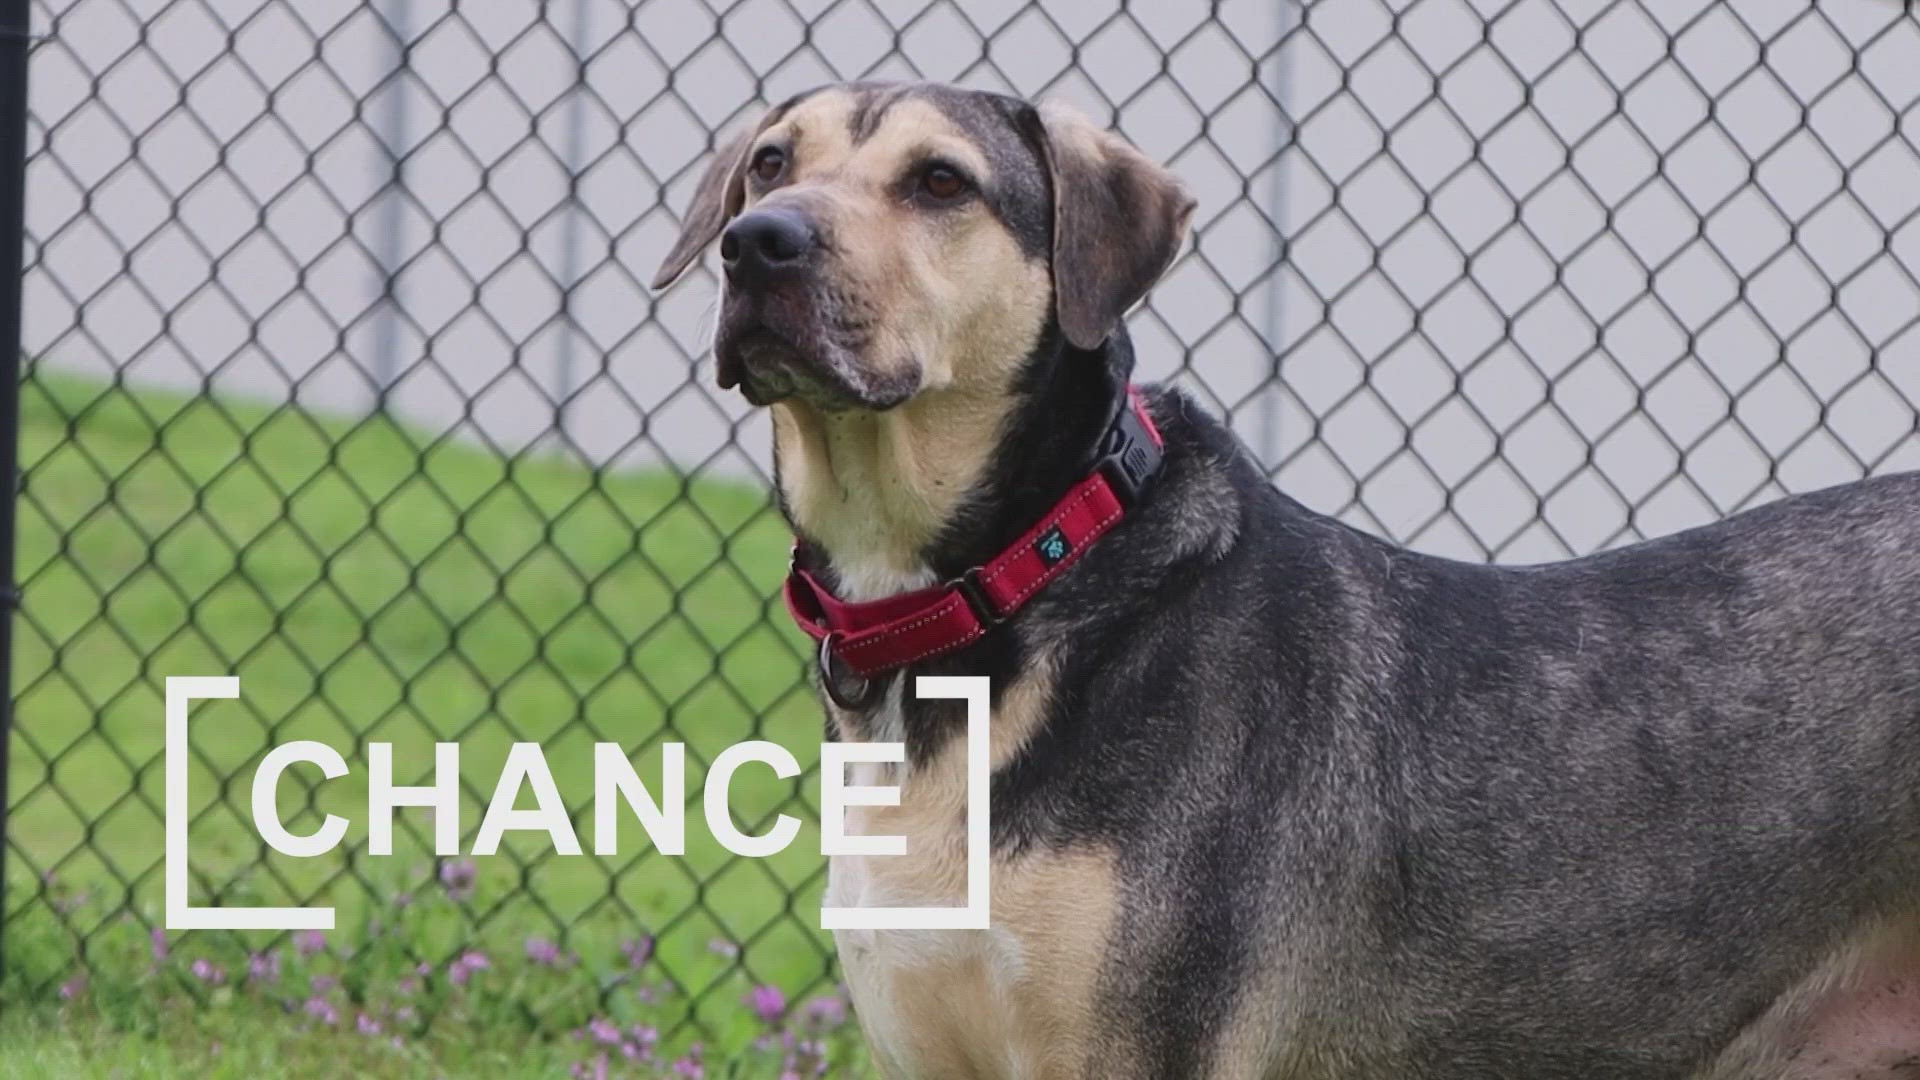 Chance is looking for his fur-ever home!